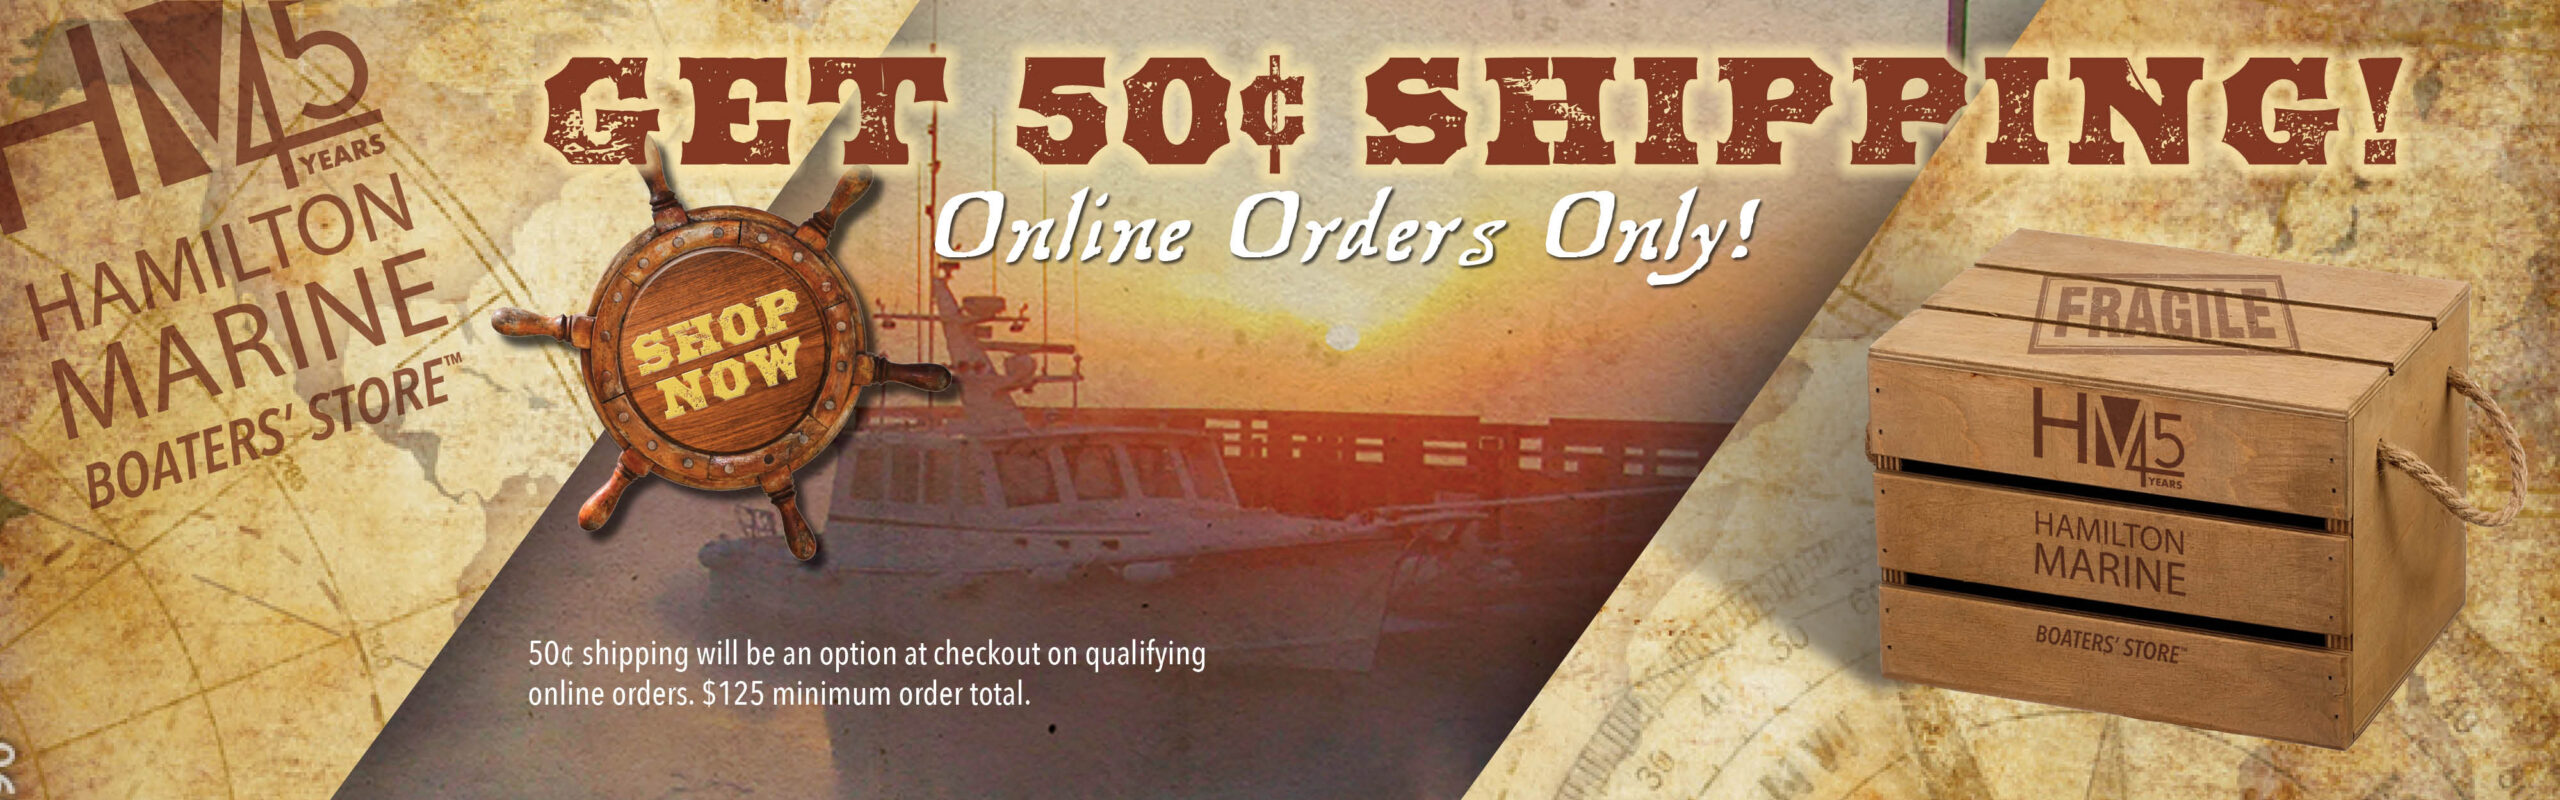 New 50 Cent Shipping 3-22